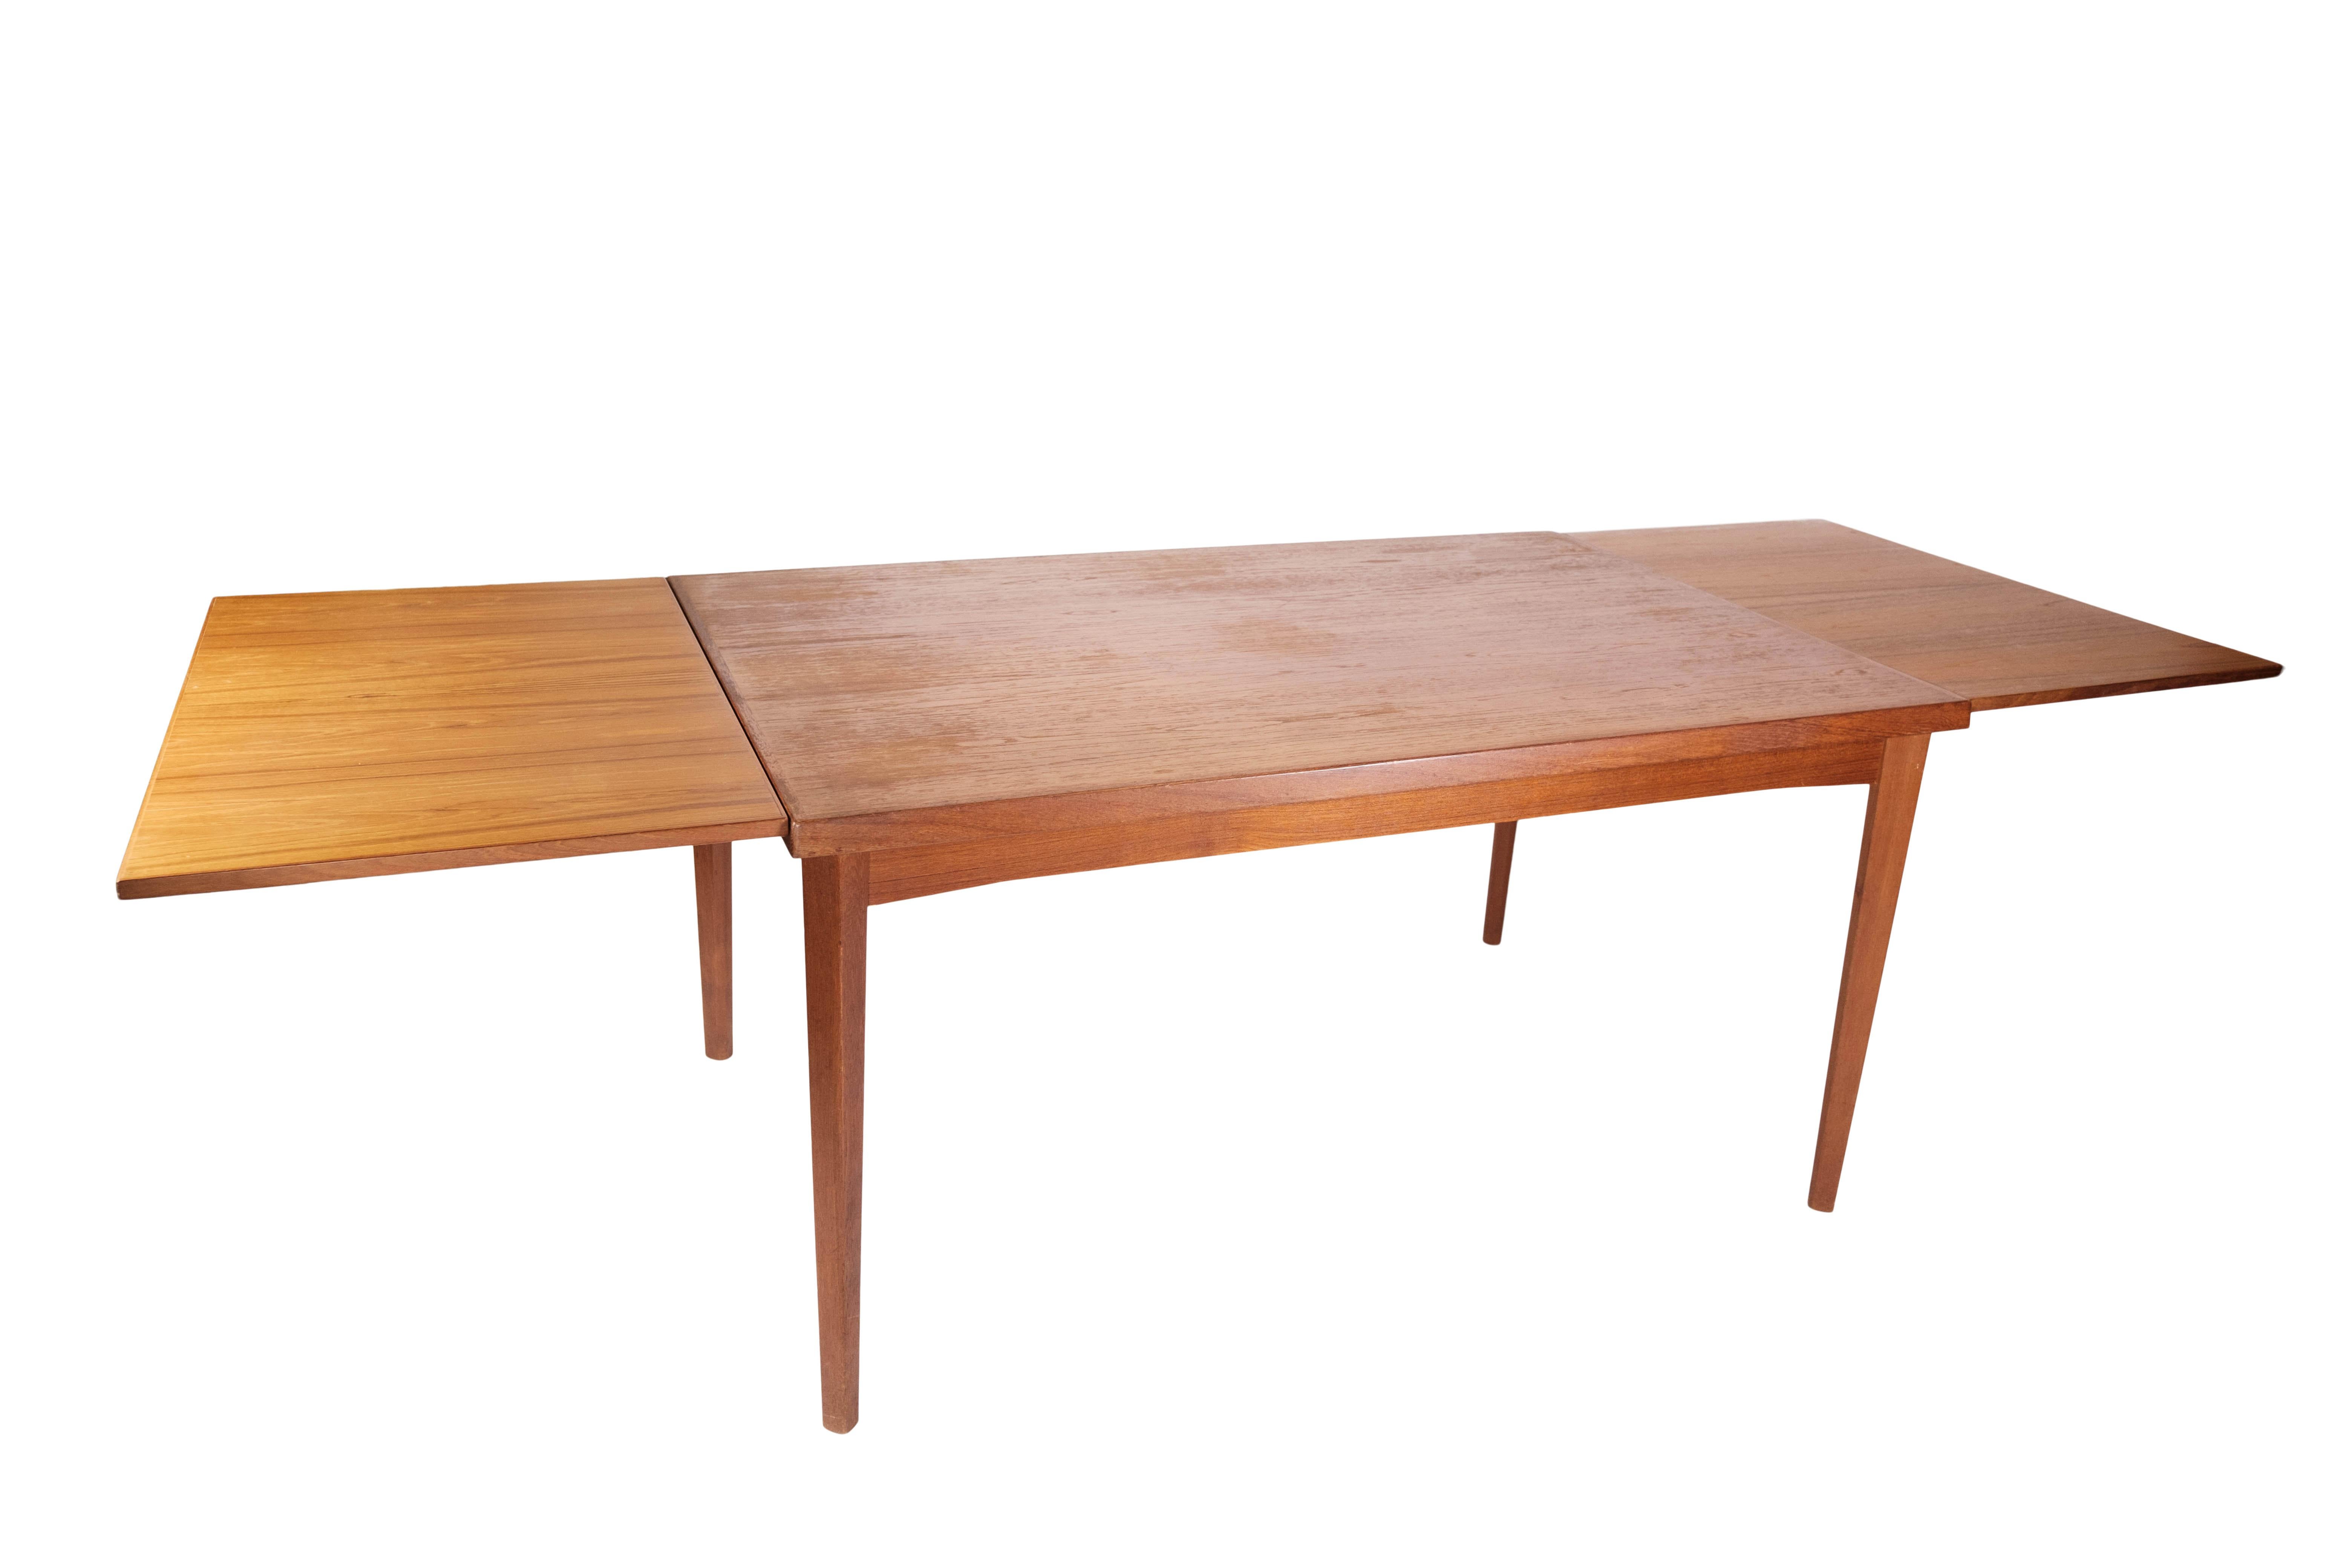 Dining table in teak with extension plates, of Danish design from the 1960s. The table is in great vintage condition. 
The extensions measures 54 cm each.